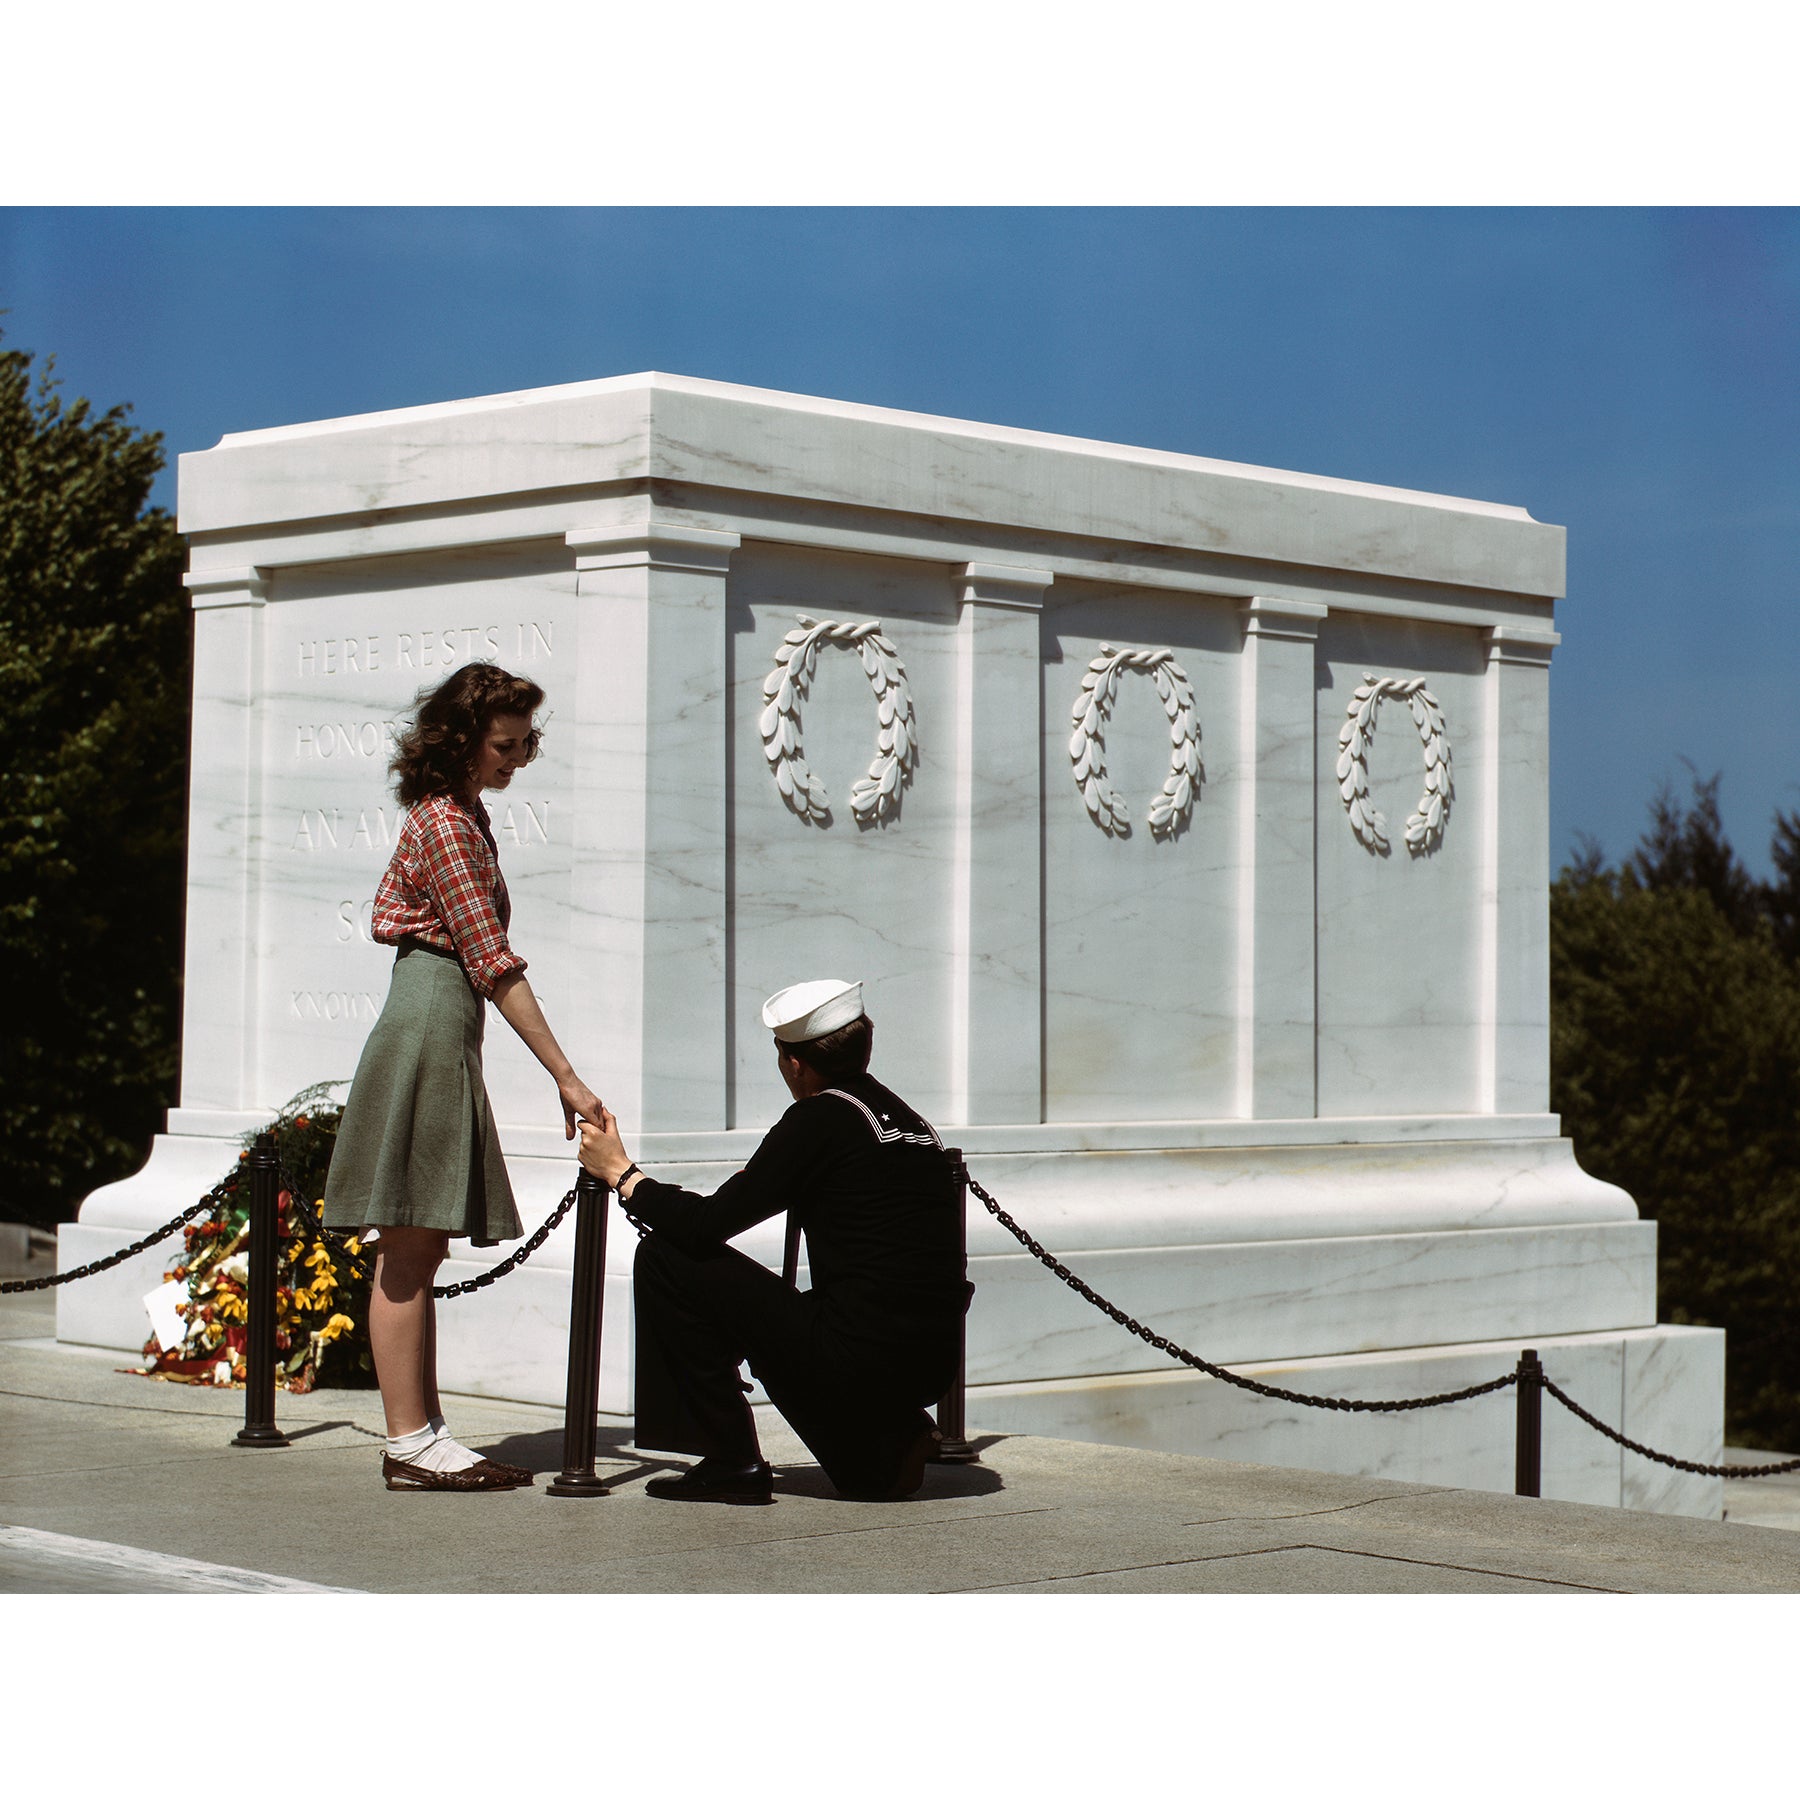 A vintage, color photograph of a couple in front of the Tomb of the Unknown Soldier